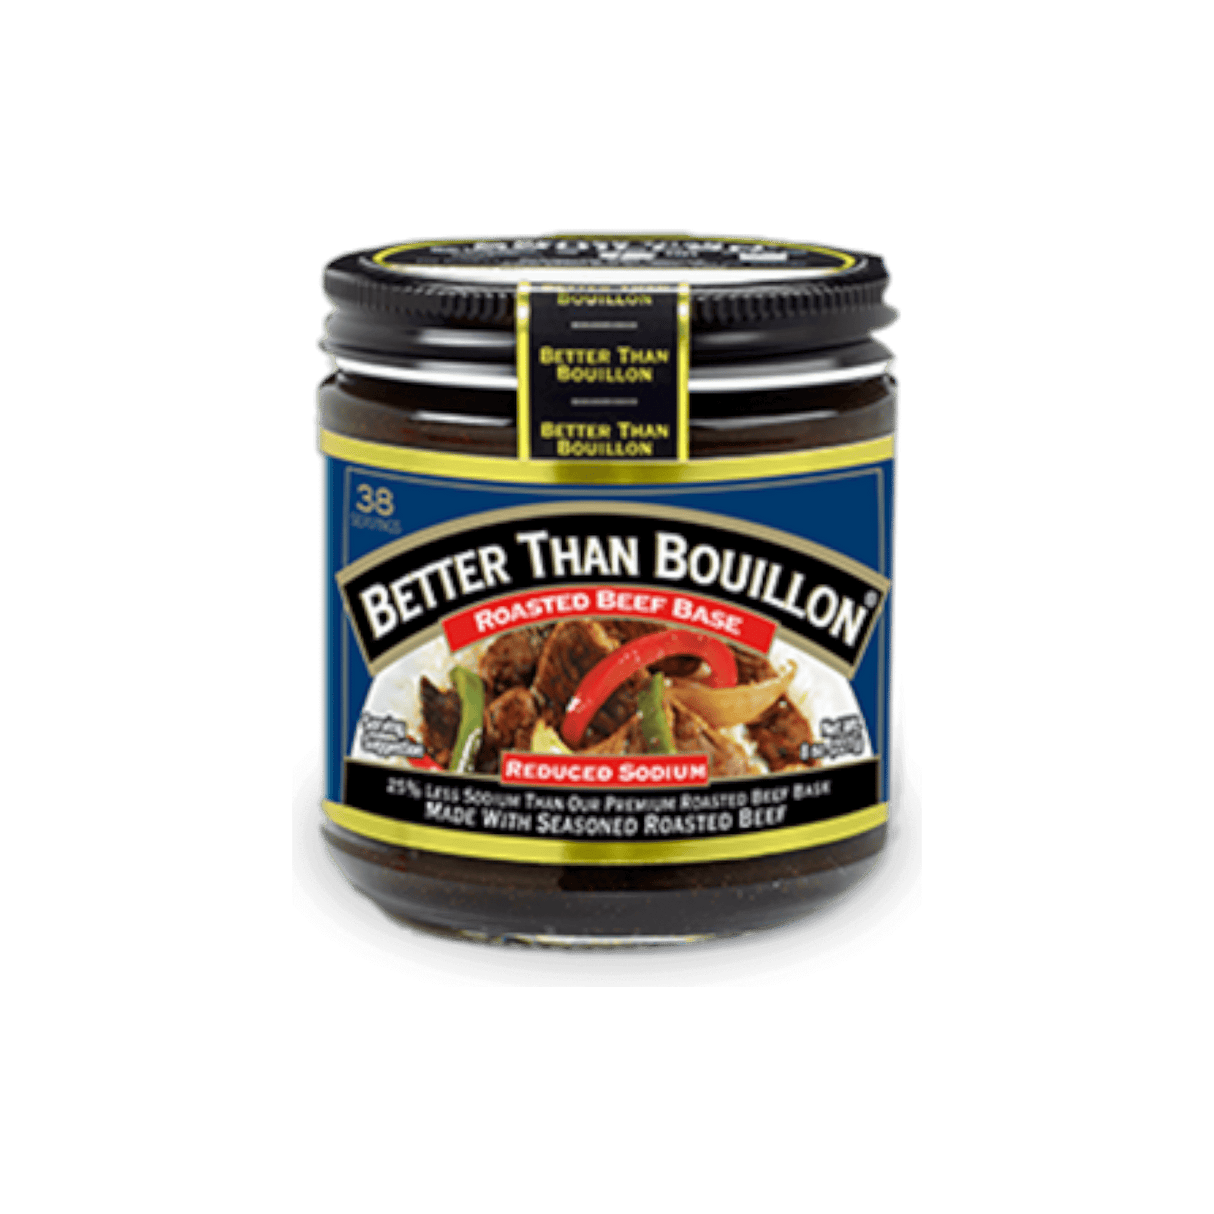 Better Than Bouillon Roasted Beef Base (Reduced Sodium)